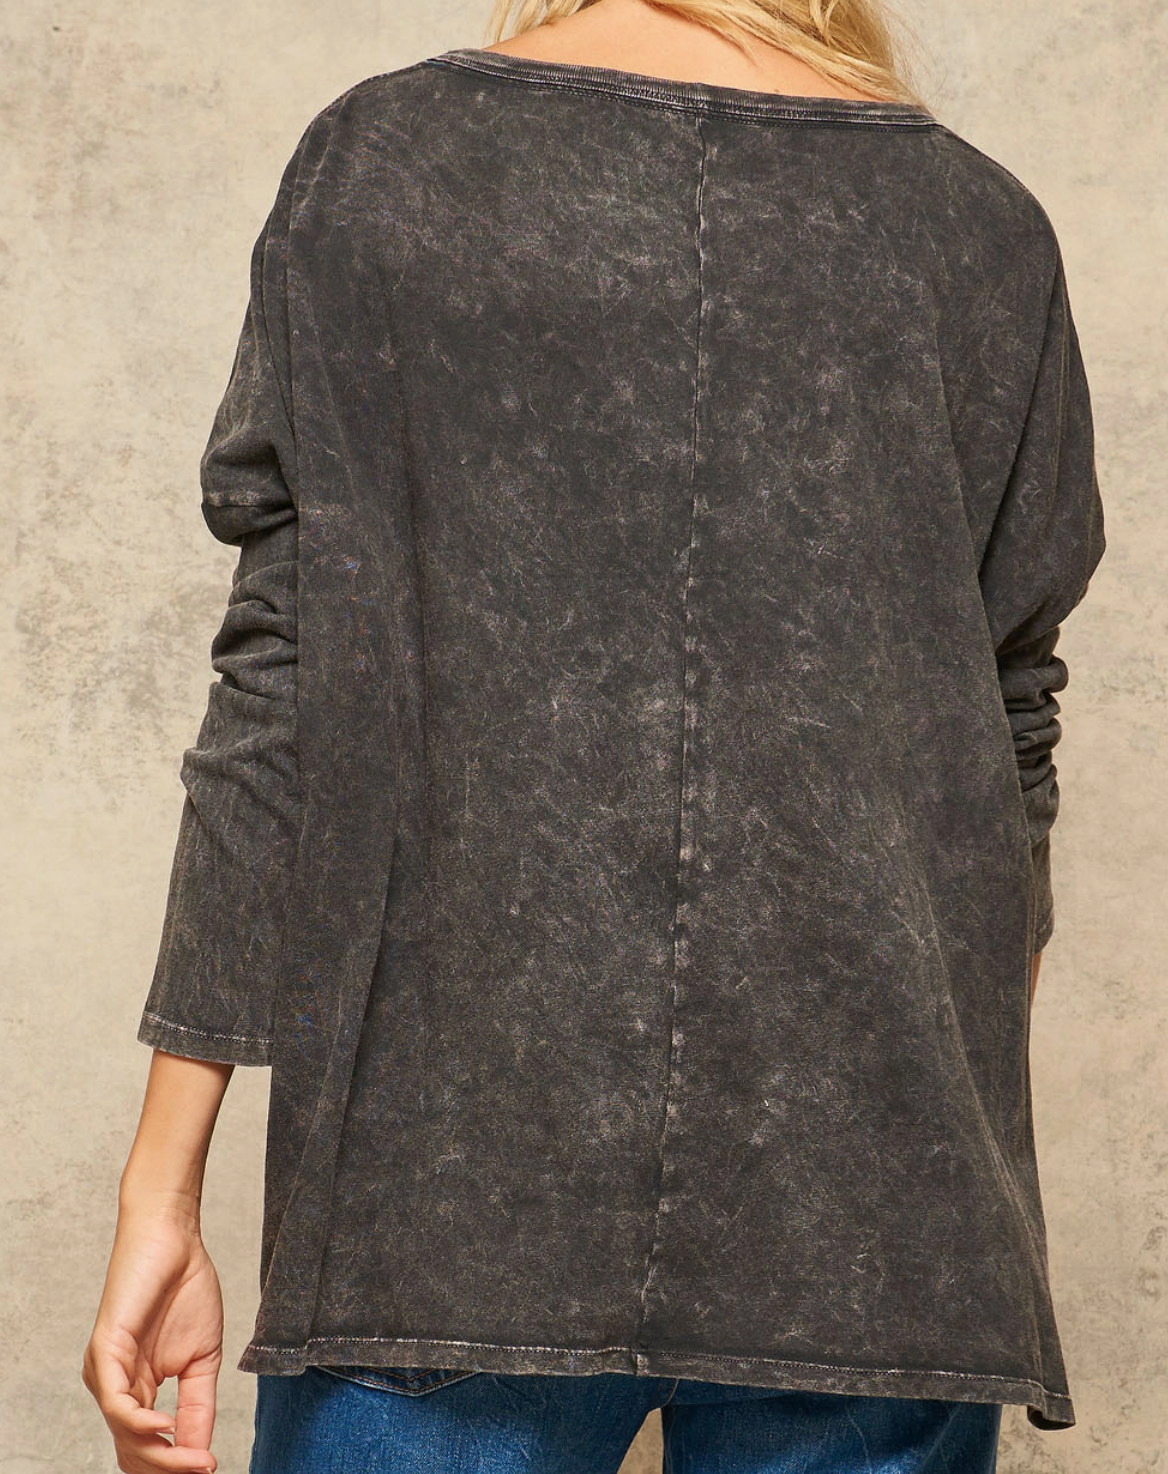 Mineral Washed Oversize Long-Sleeve Tee in Charcoal - The Street Boutique 